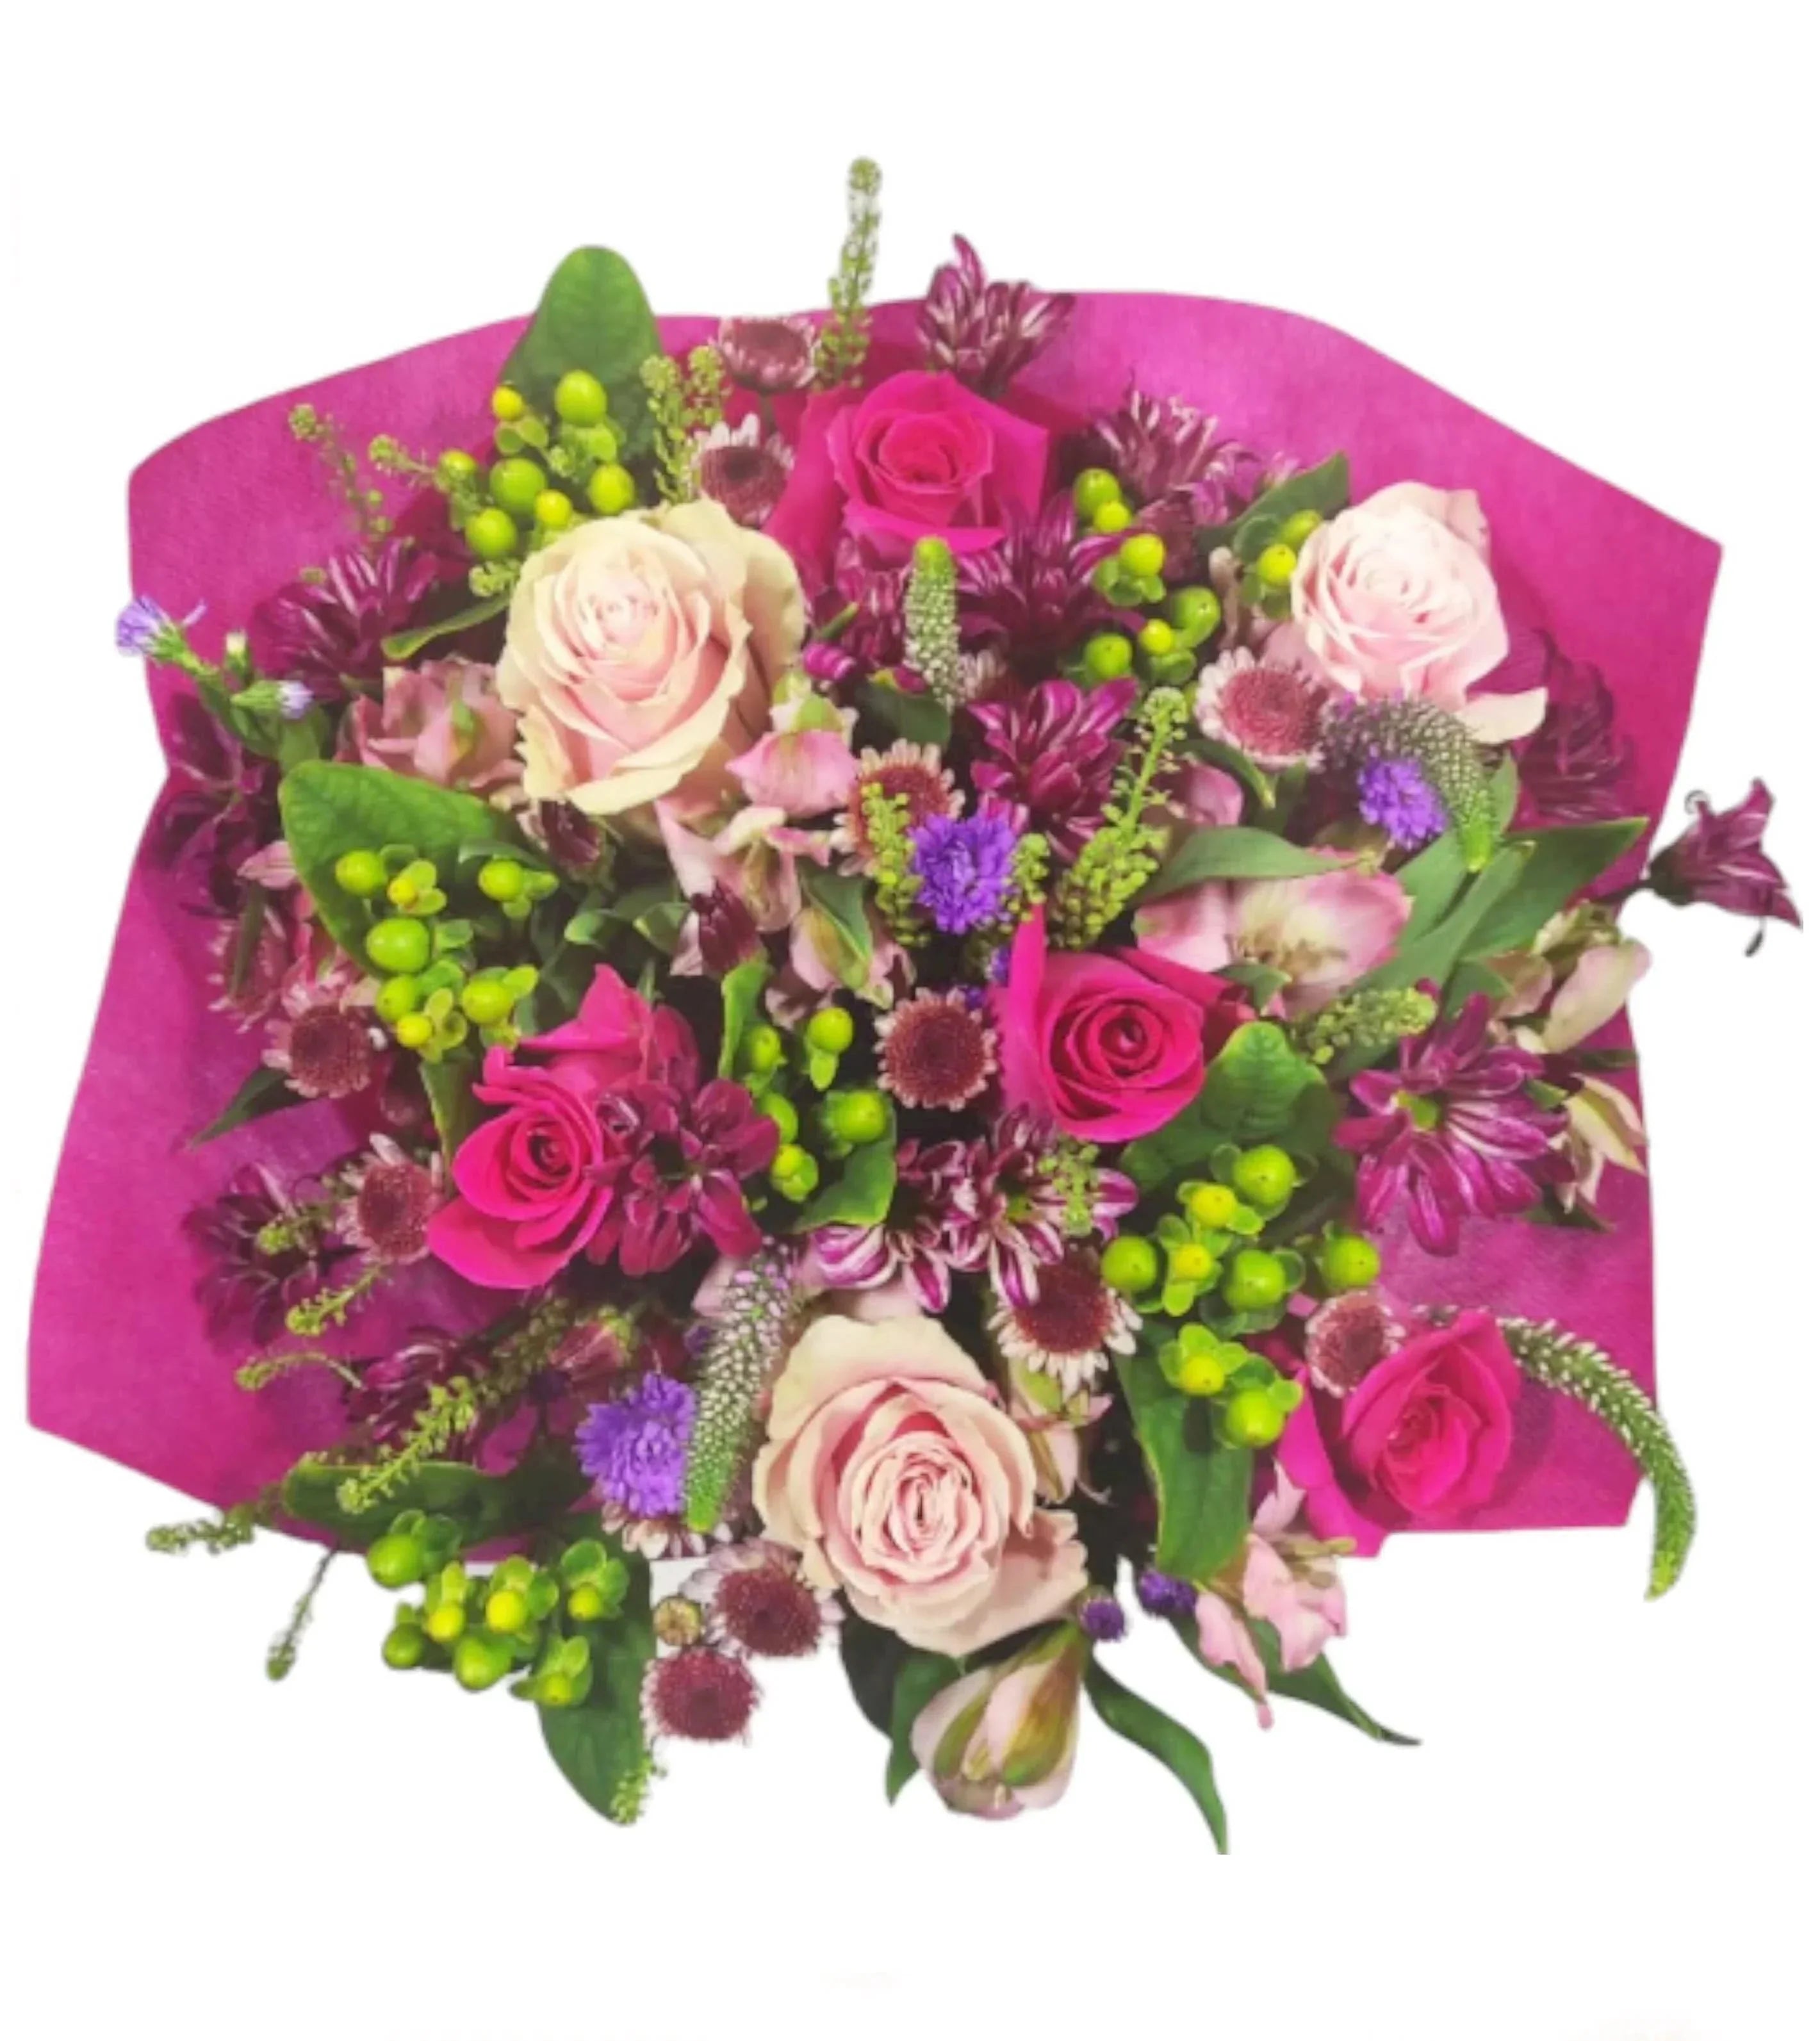 Flower Co.'s Beautiful Mom Bouquet is a sweet design comprised of hot and light pink roses, green hypericum, purple chrysanthemums and veronicas, accented by premium fillers and foliage.